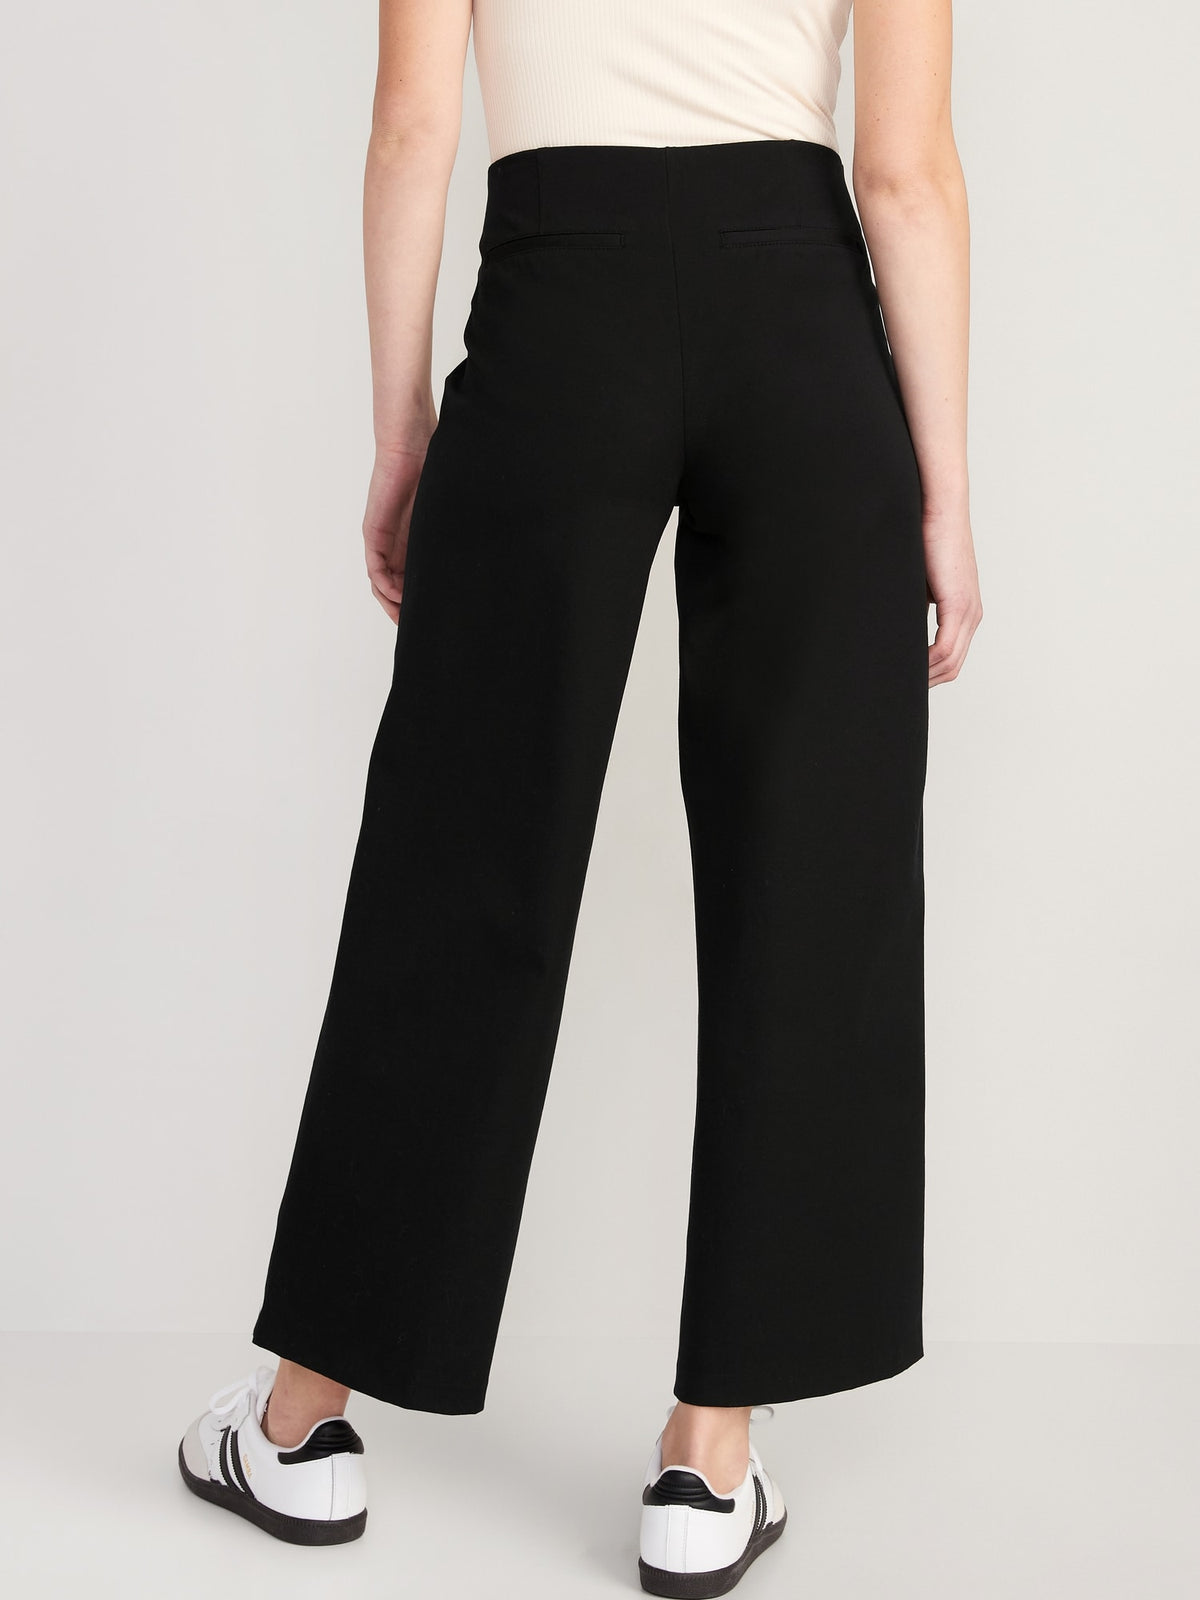 High-Waisted Pull-On Pixie Wide-Leg Pants for Women - Old Navy Philippines